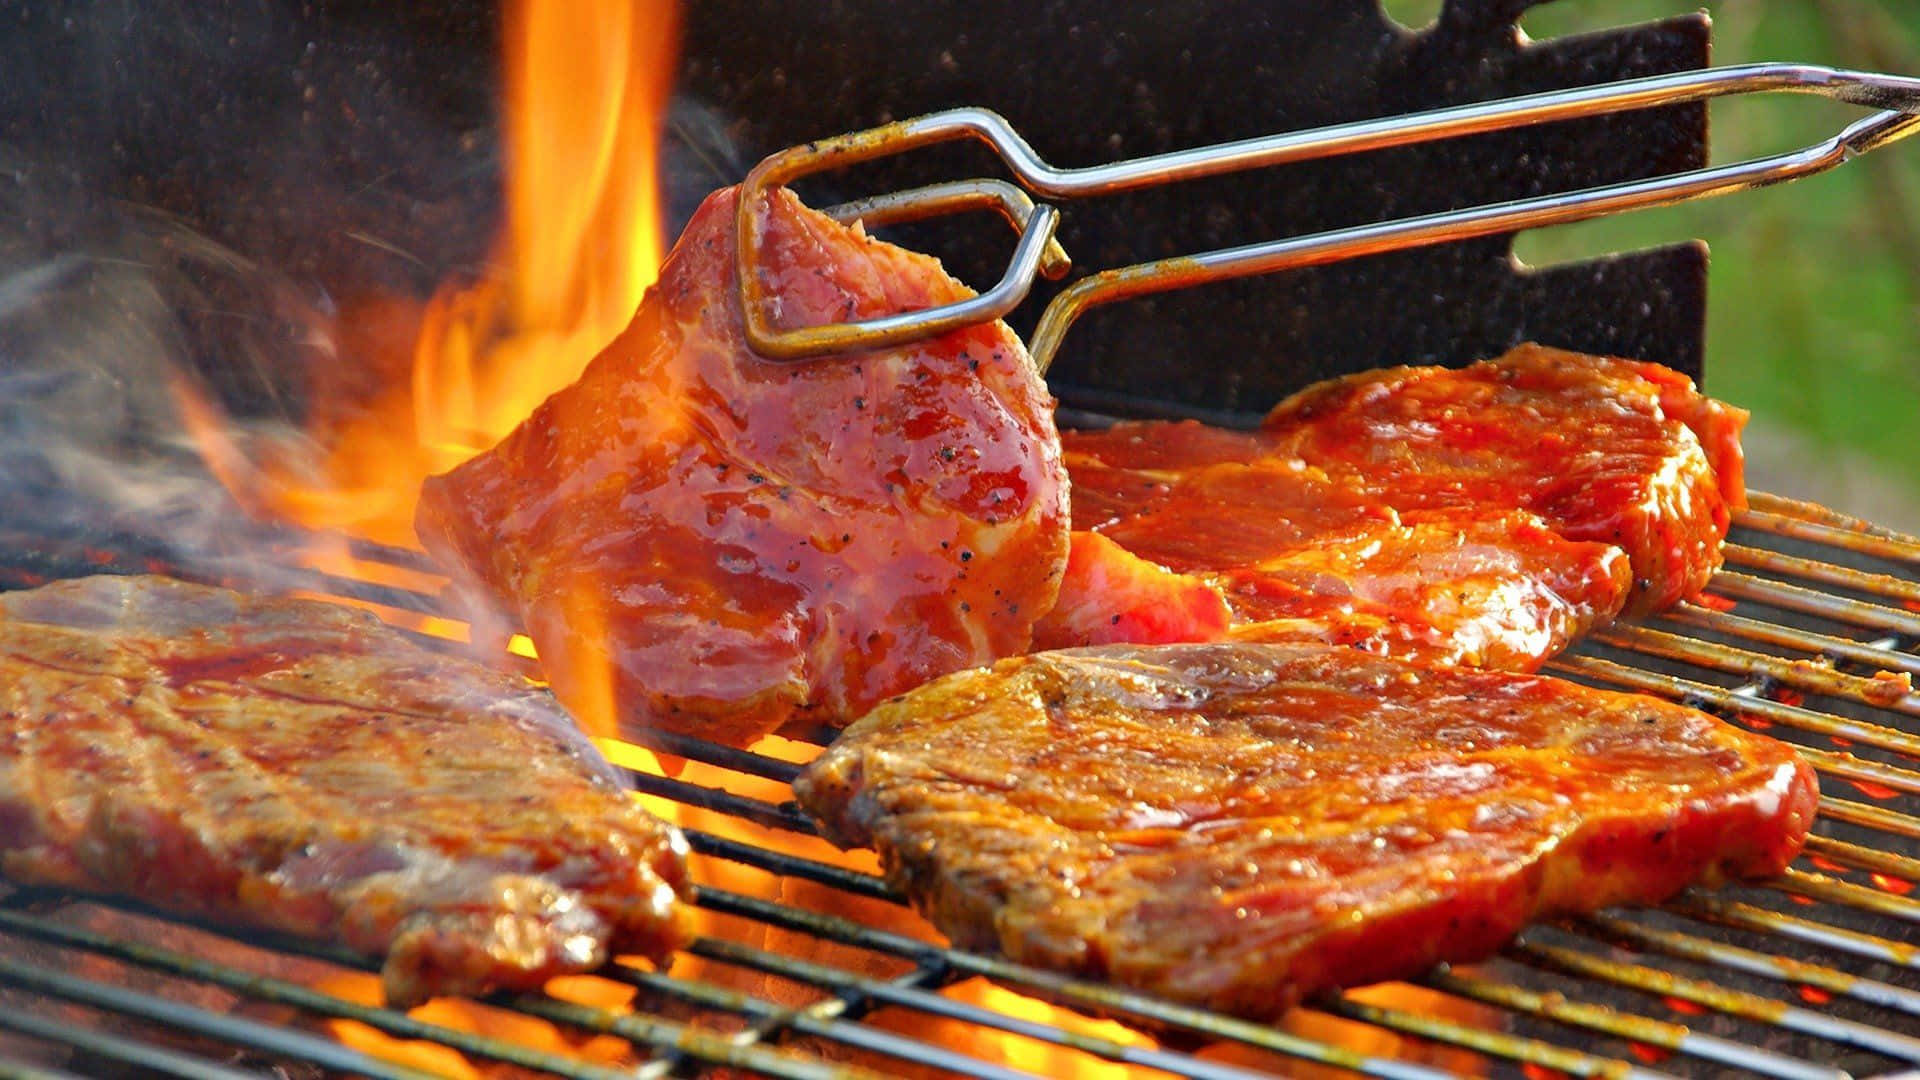 Enjoy the mouth watering flavours at your next BBQ feast